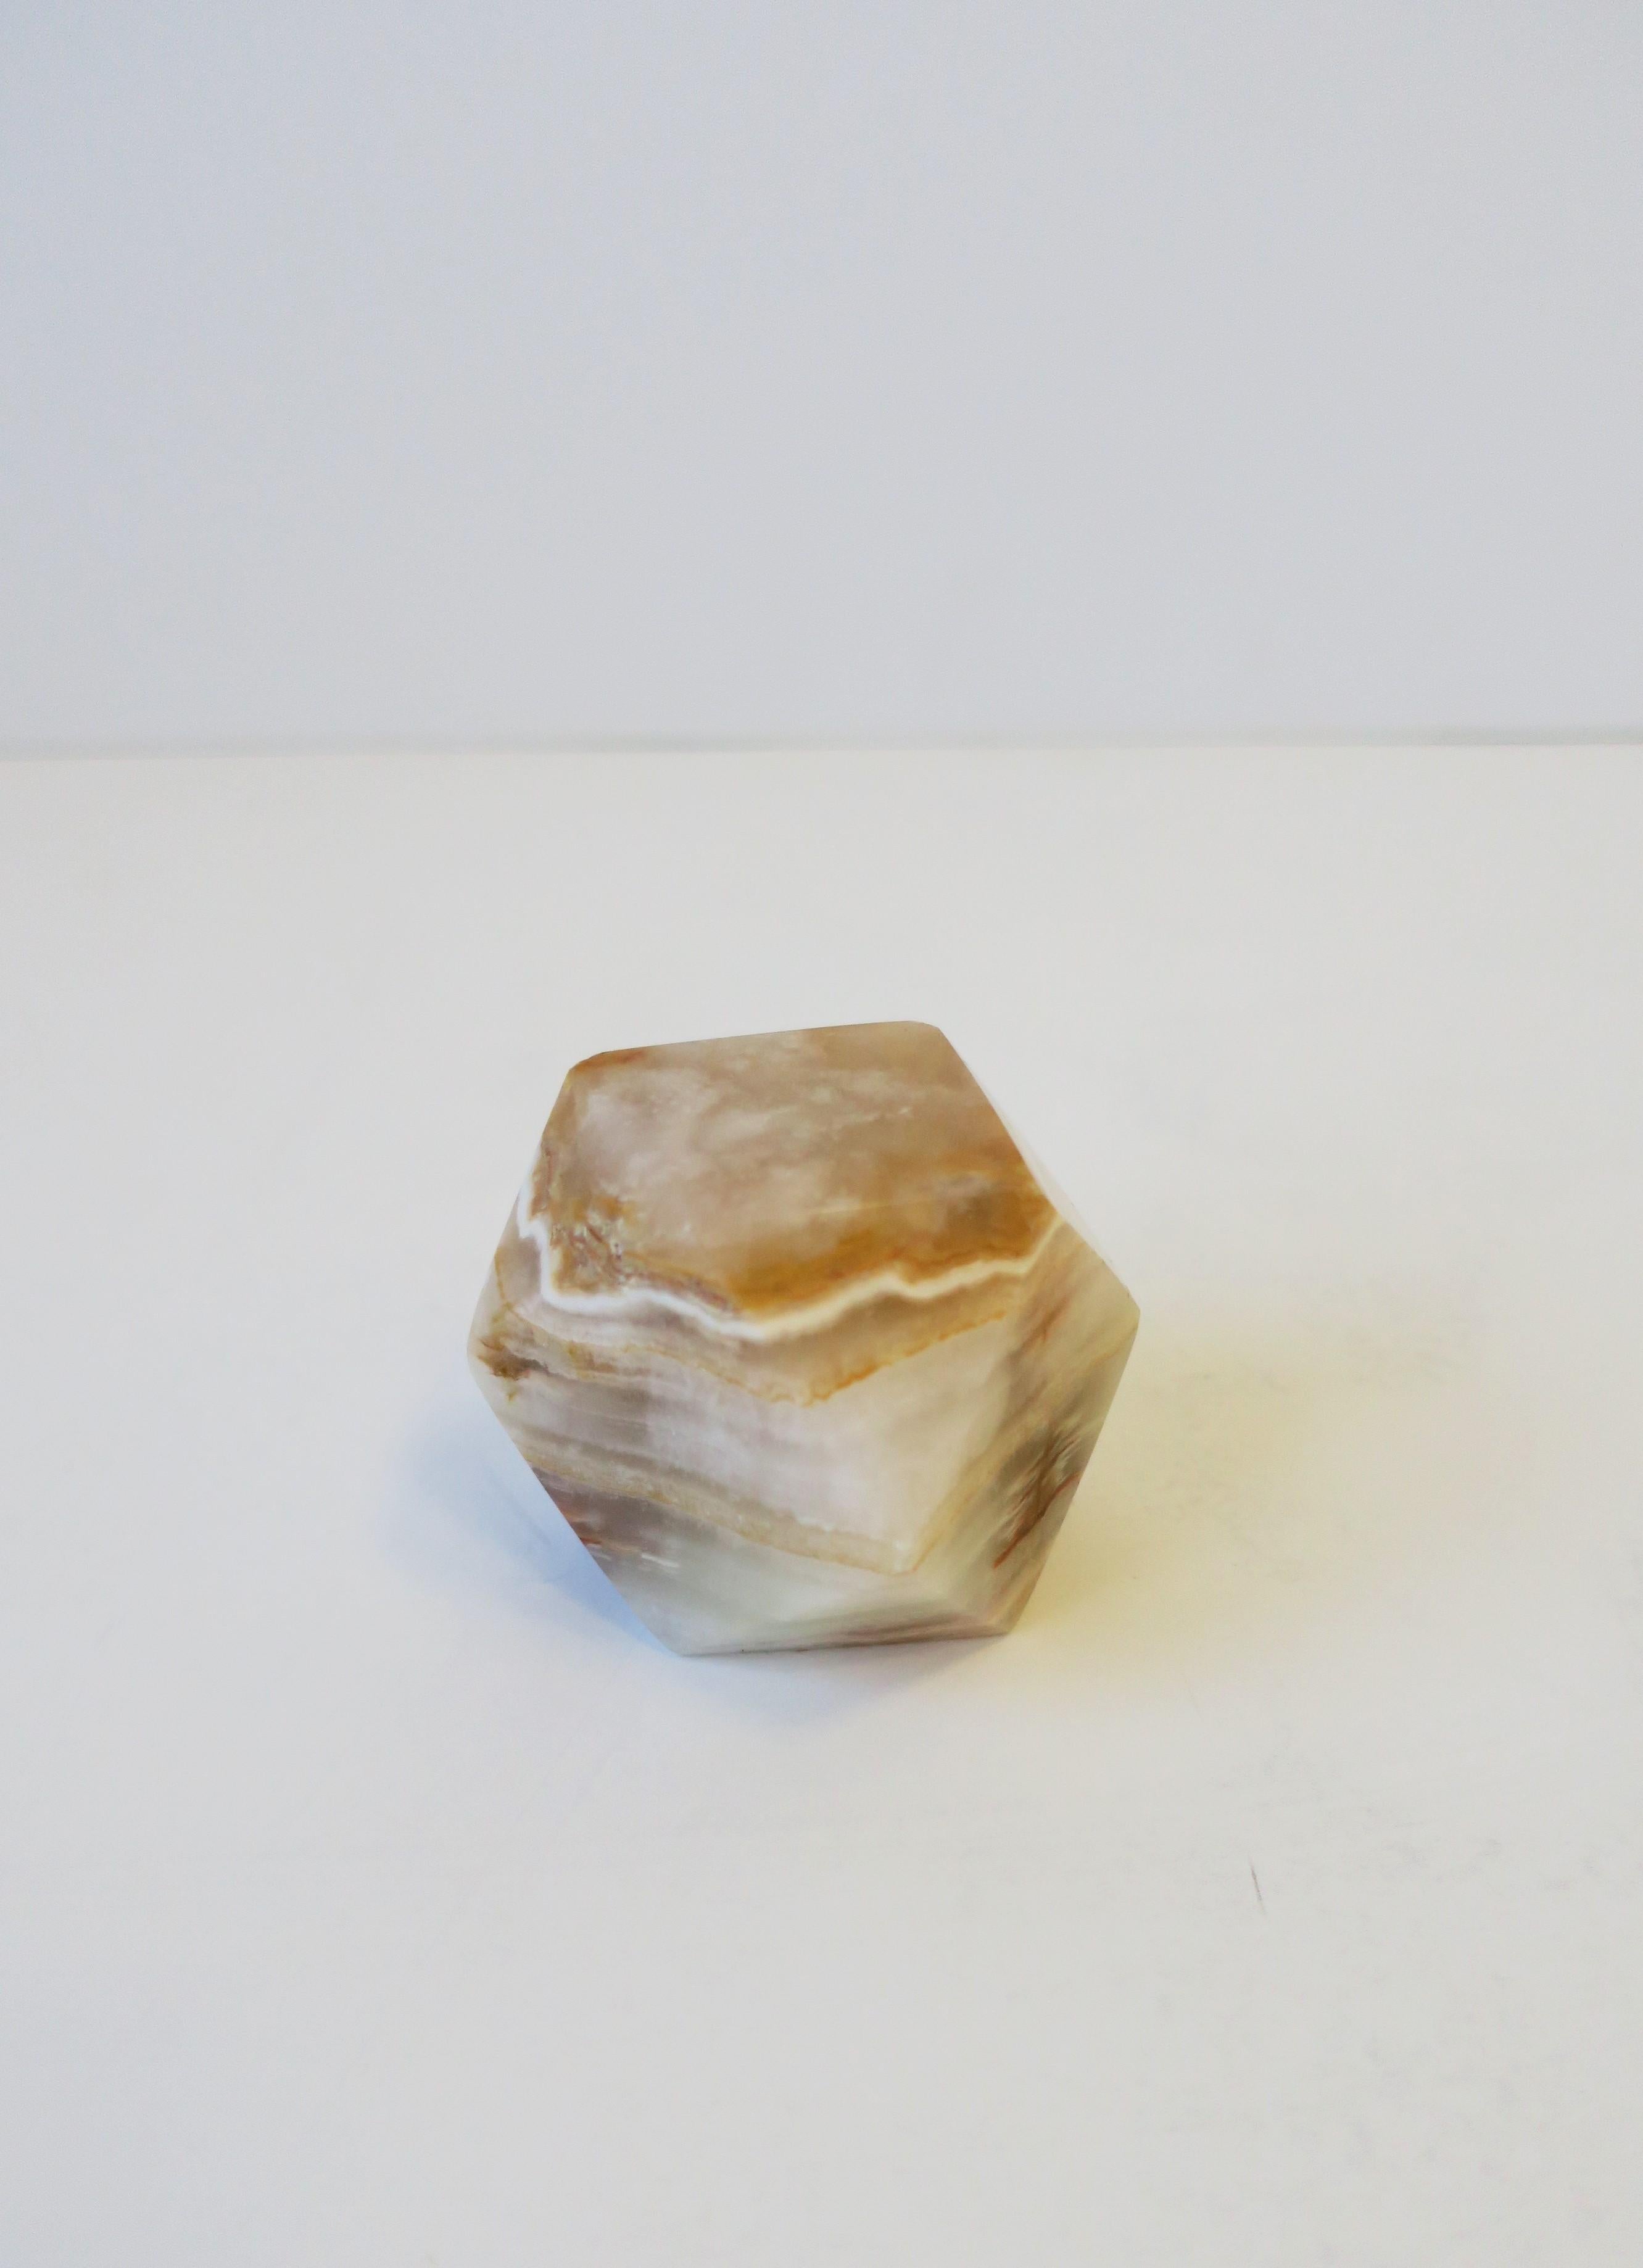 A chic 1970s modern Italian geometric onyx marble desk paperweight or decorative object sculpture piece, circa 1970s, Italy. Piece is multicolored in white and neutral hues. A great piece for a desk, table, credenza, etc. Dimensions: 2